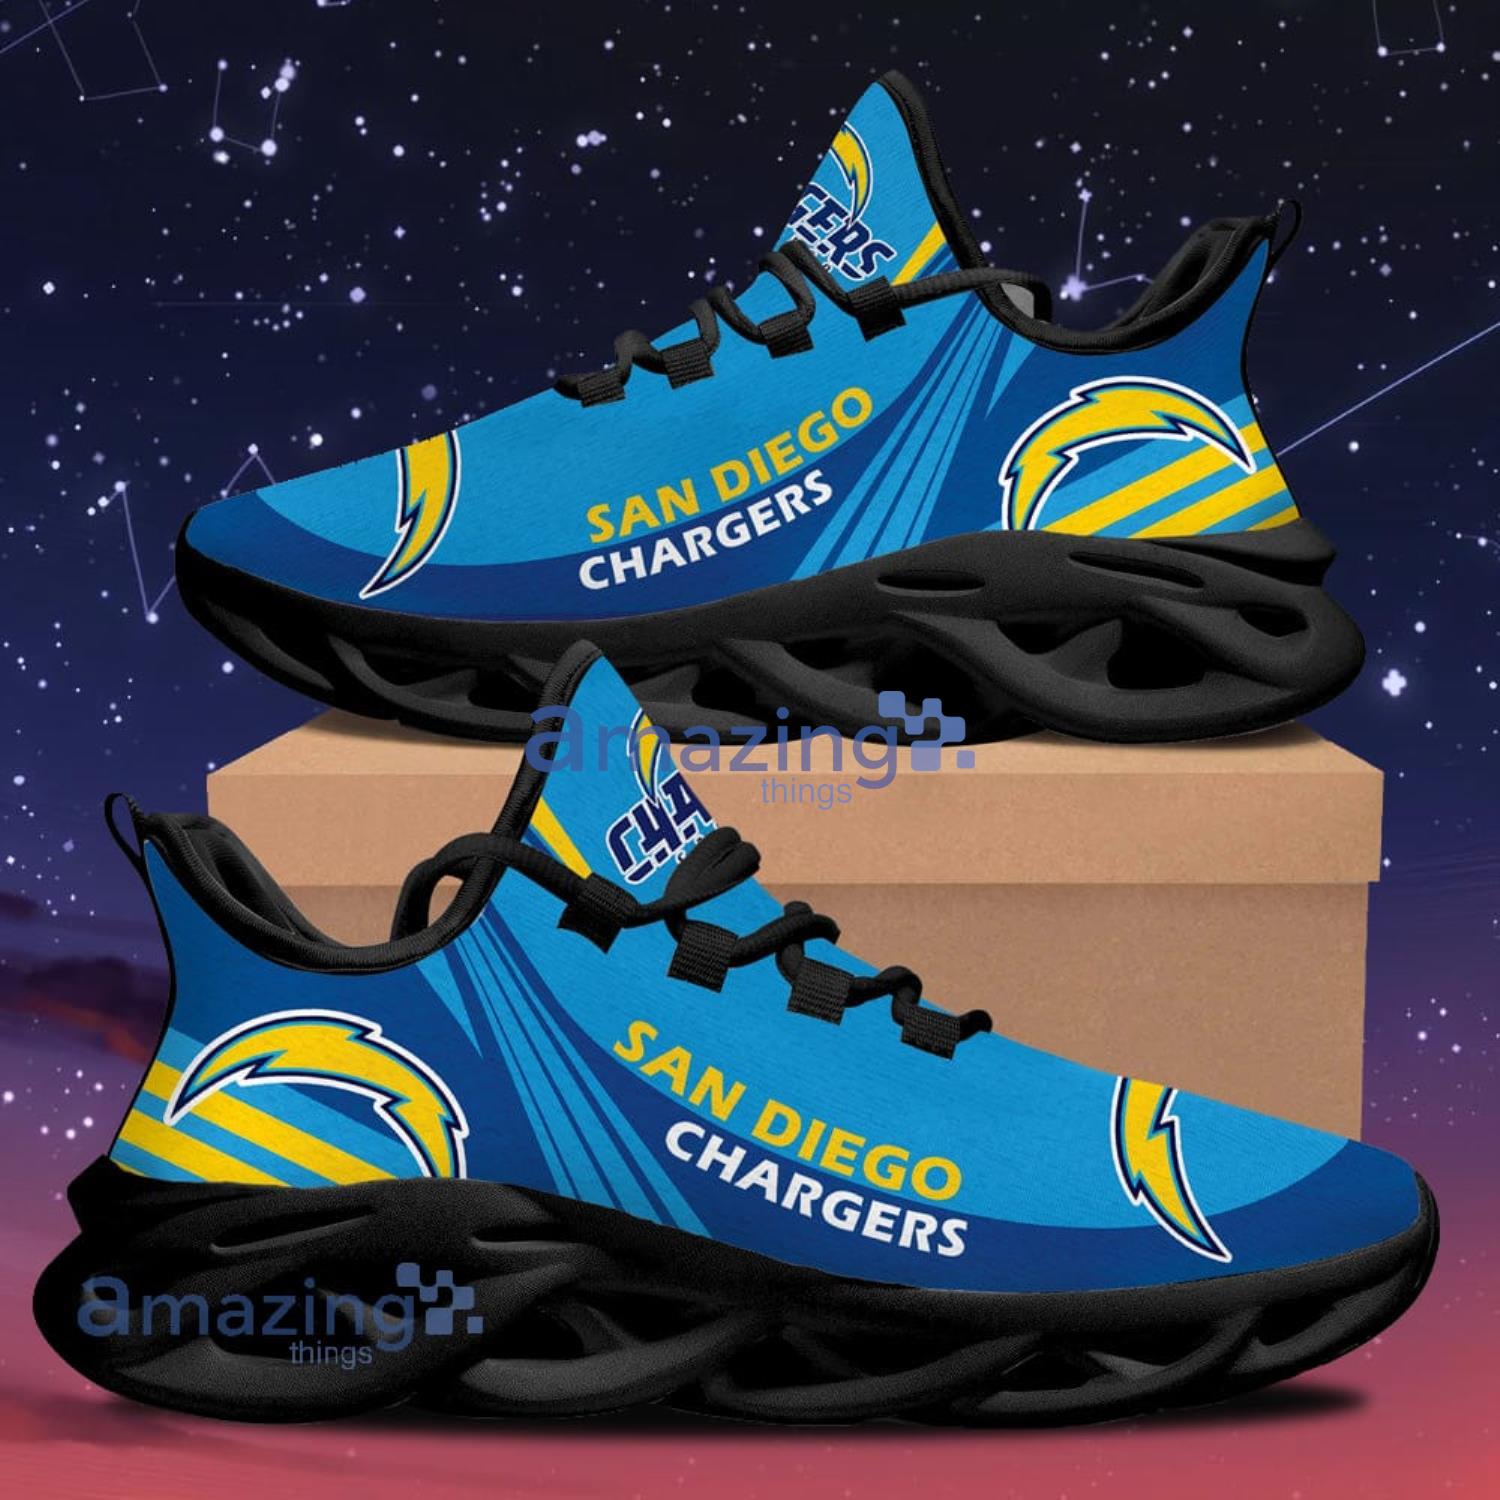 San Diego Chargers New Trend Max Soul Shoes Running Sneakers Product Photo 1